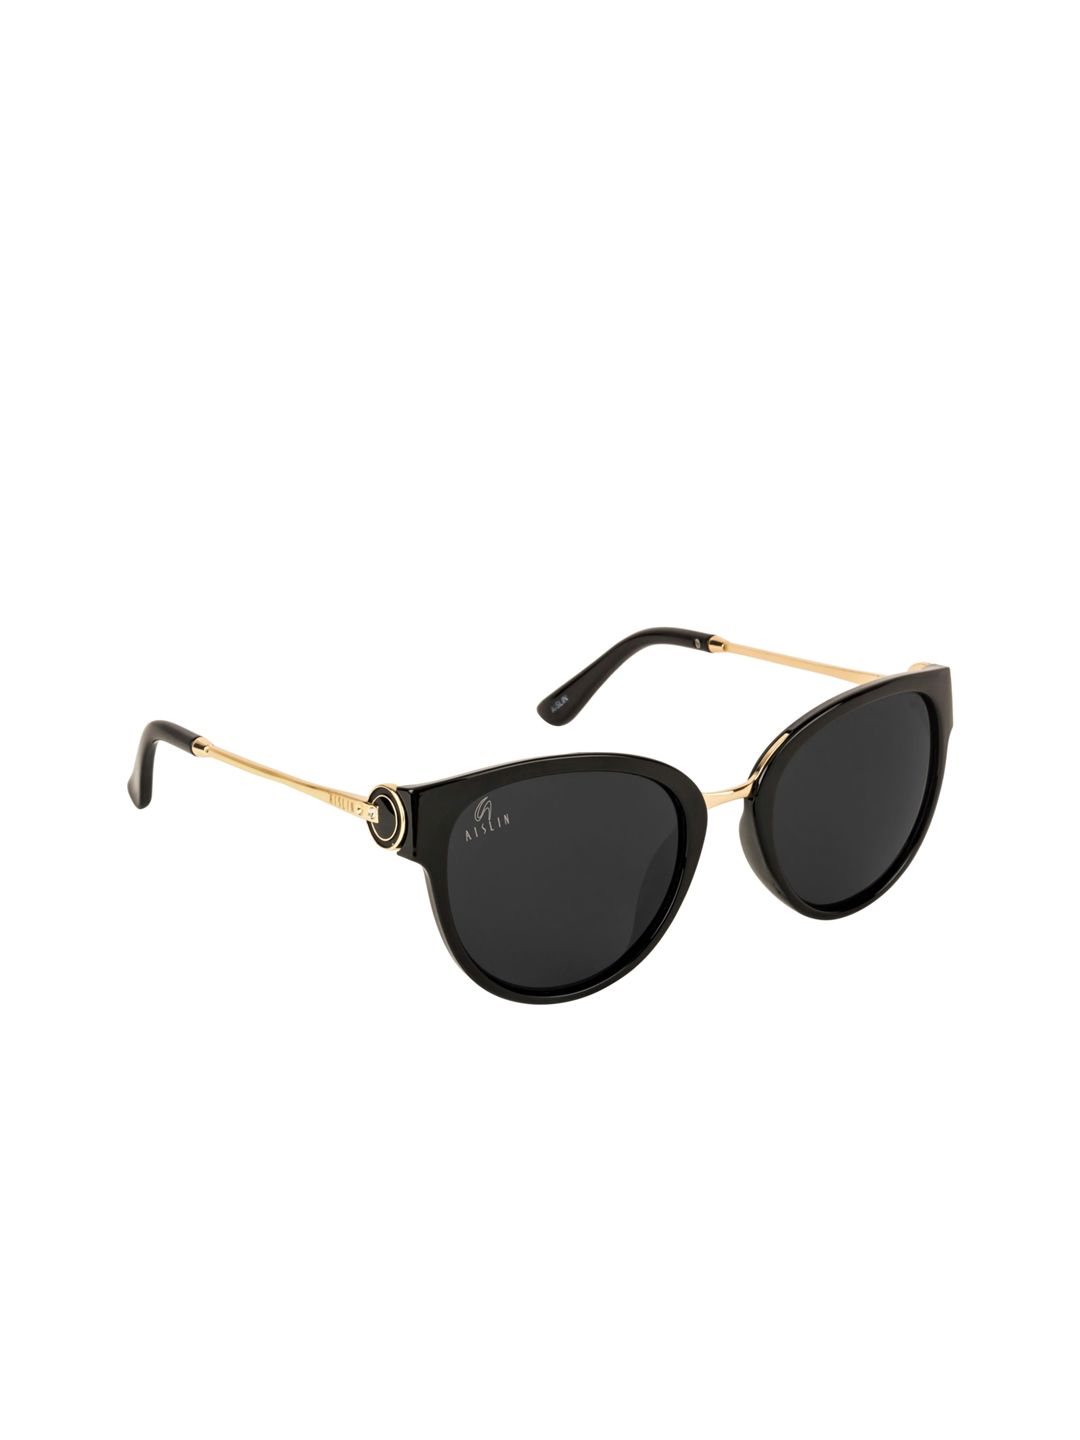 AISLIN Women Black Lens & Gold-toned Oval Sunglasses With Uv Protected Lens Price in India